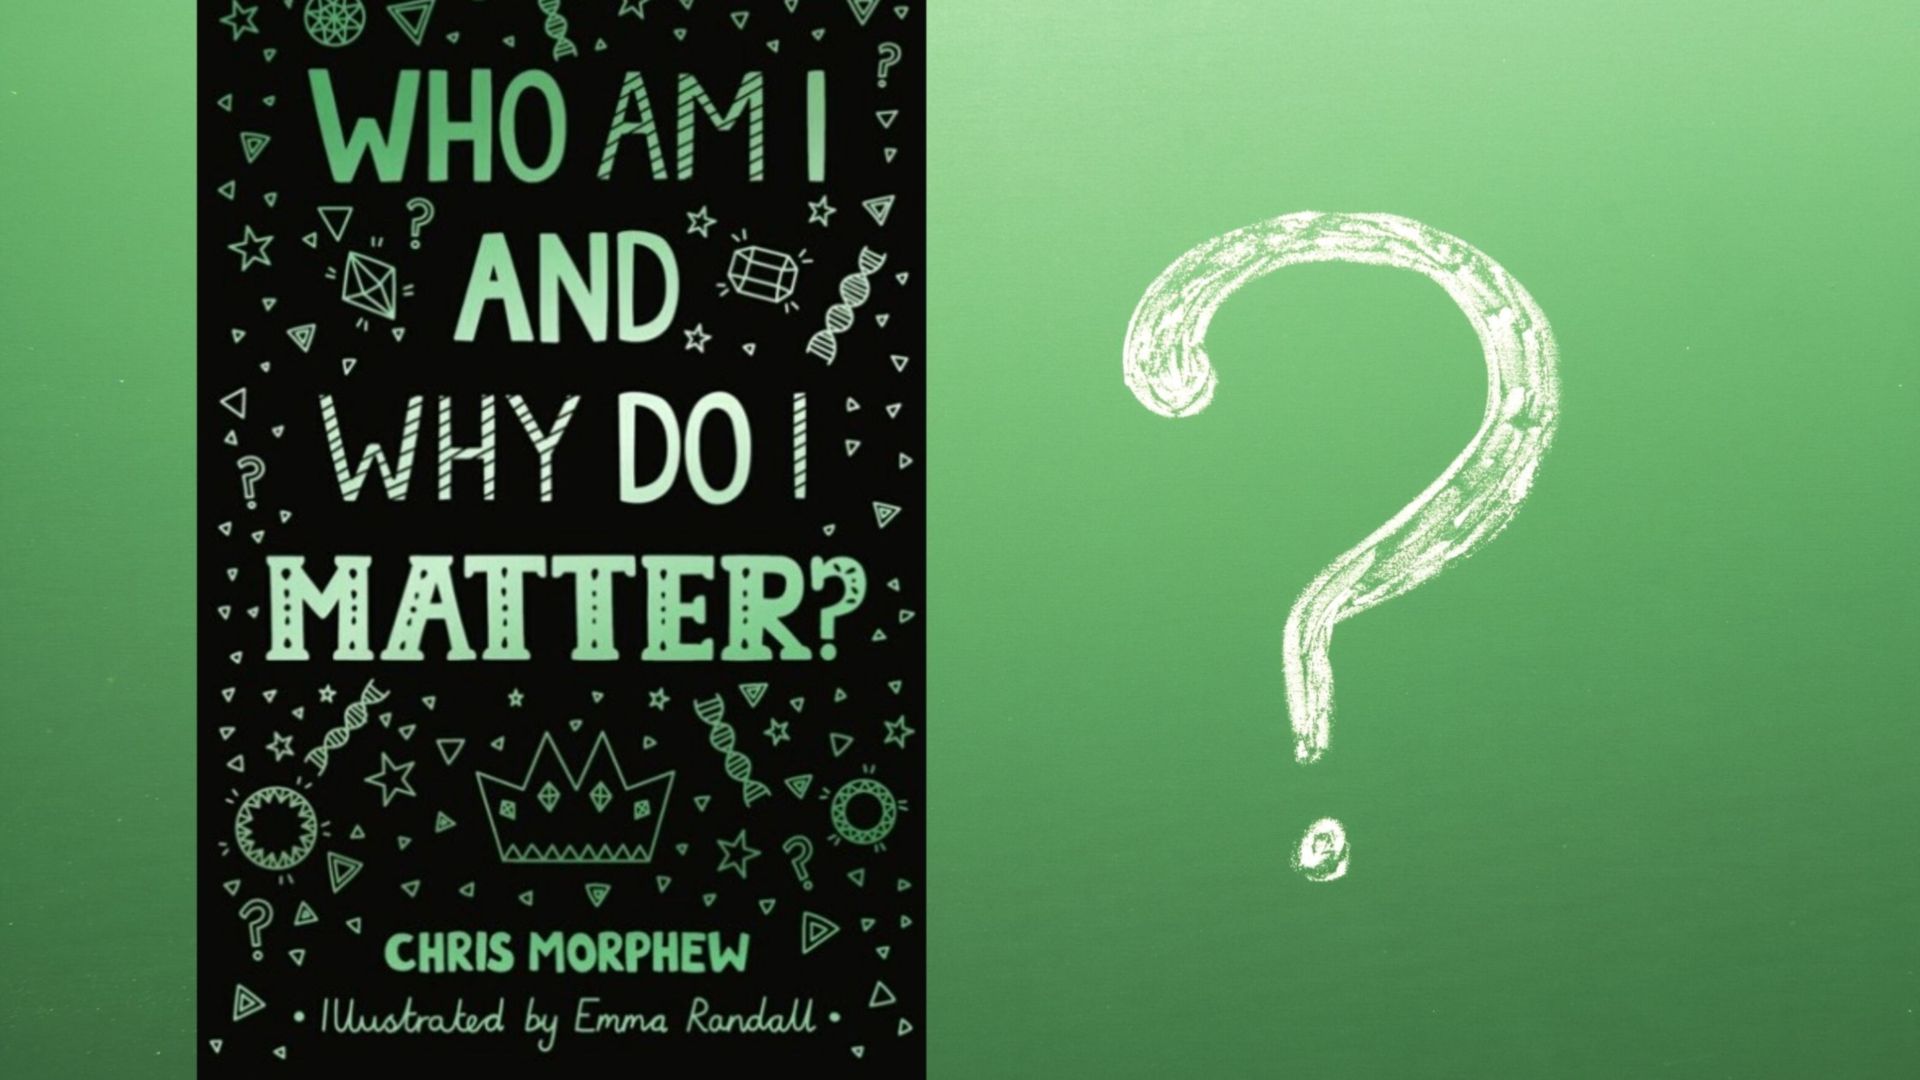 Interview with Chris Morphew, author of 'Who Am I and Why Do I Matter?'